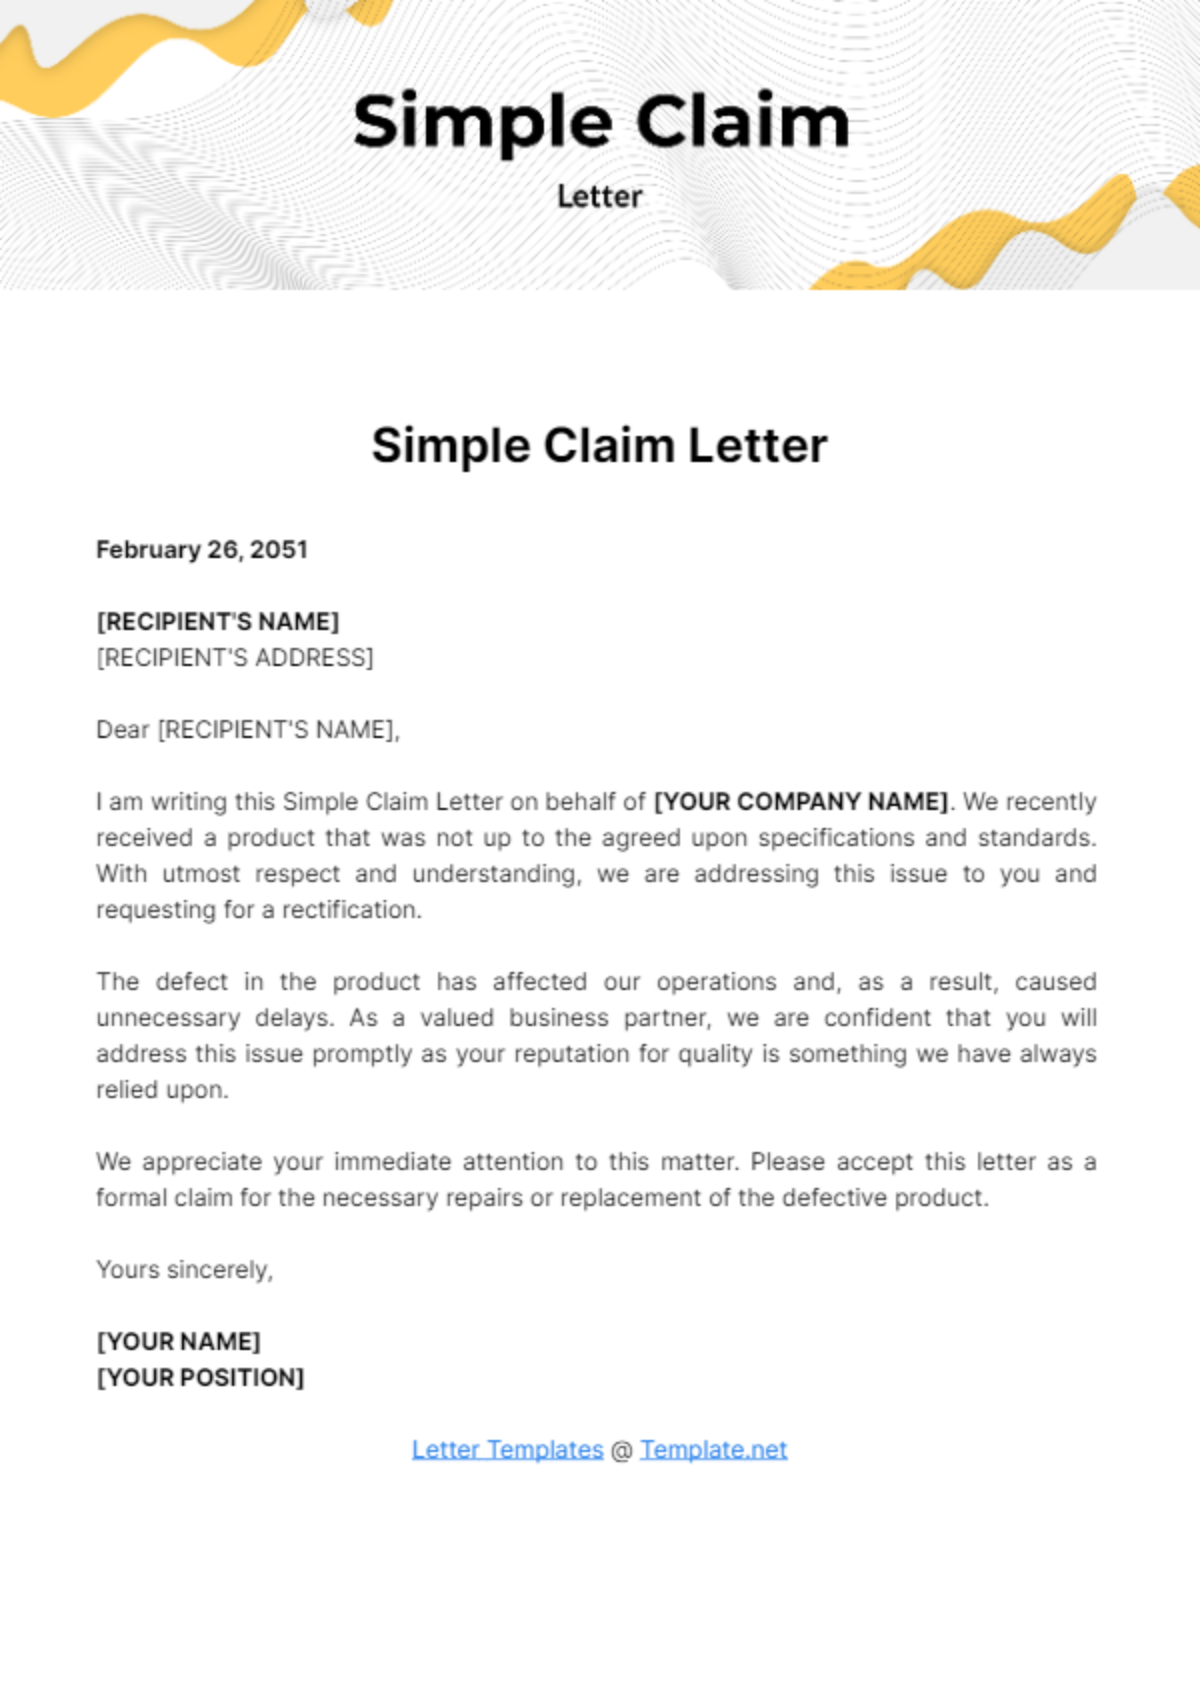 Simple Claim Letter Template